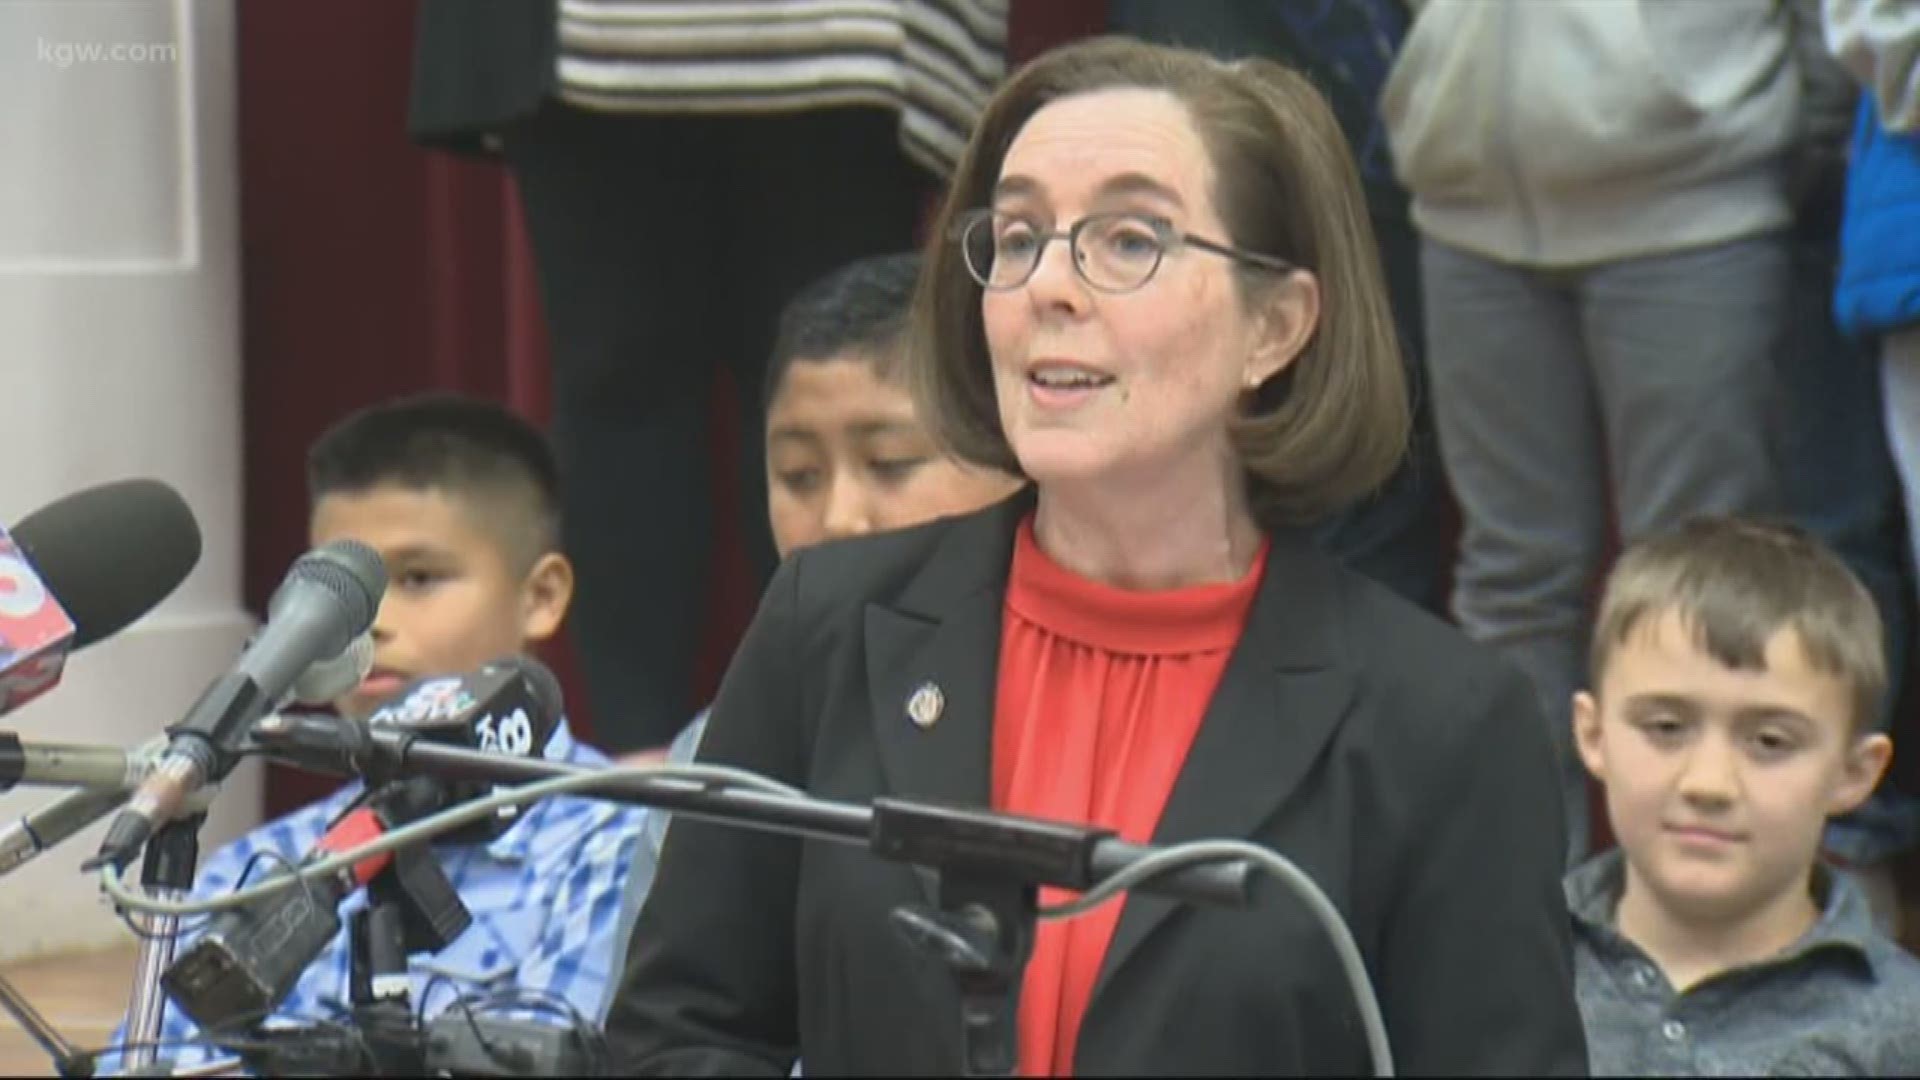 The GOP’s recall effort of Gov. Kate Brown is facing an uphill battle.